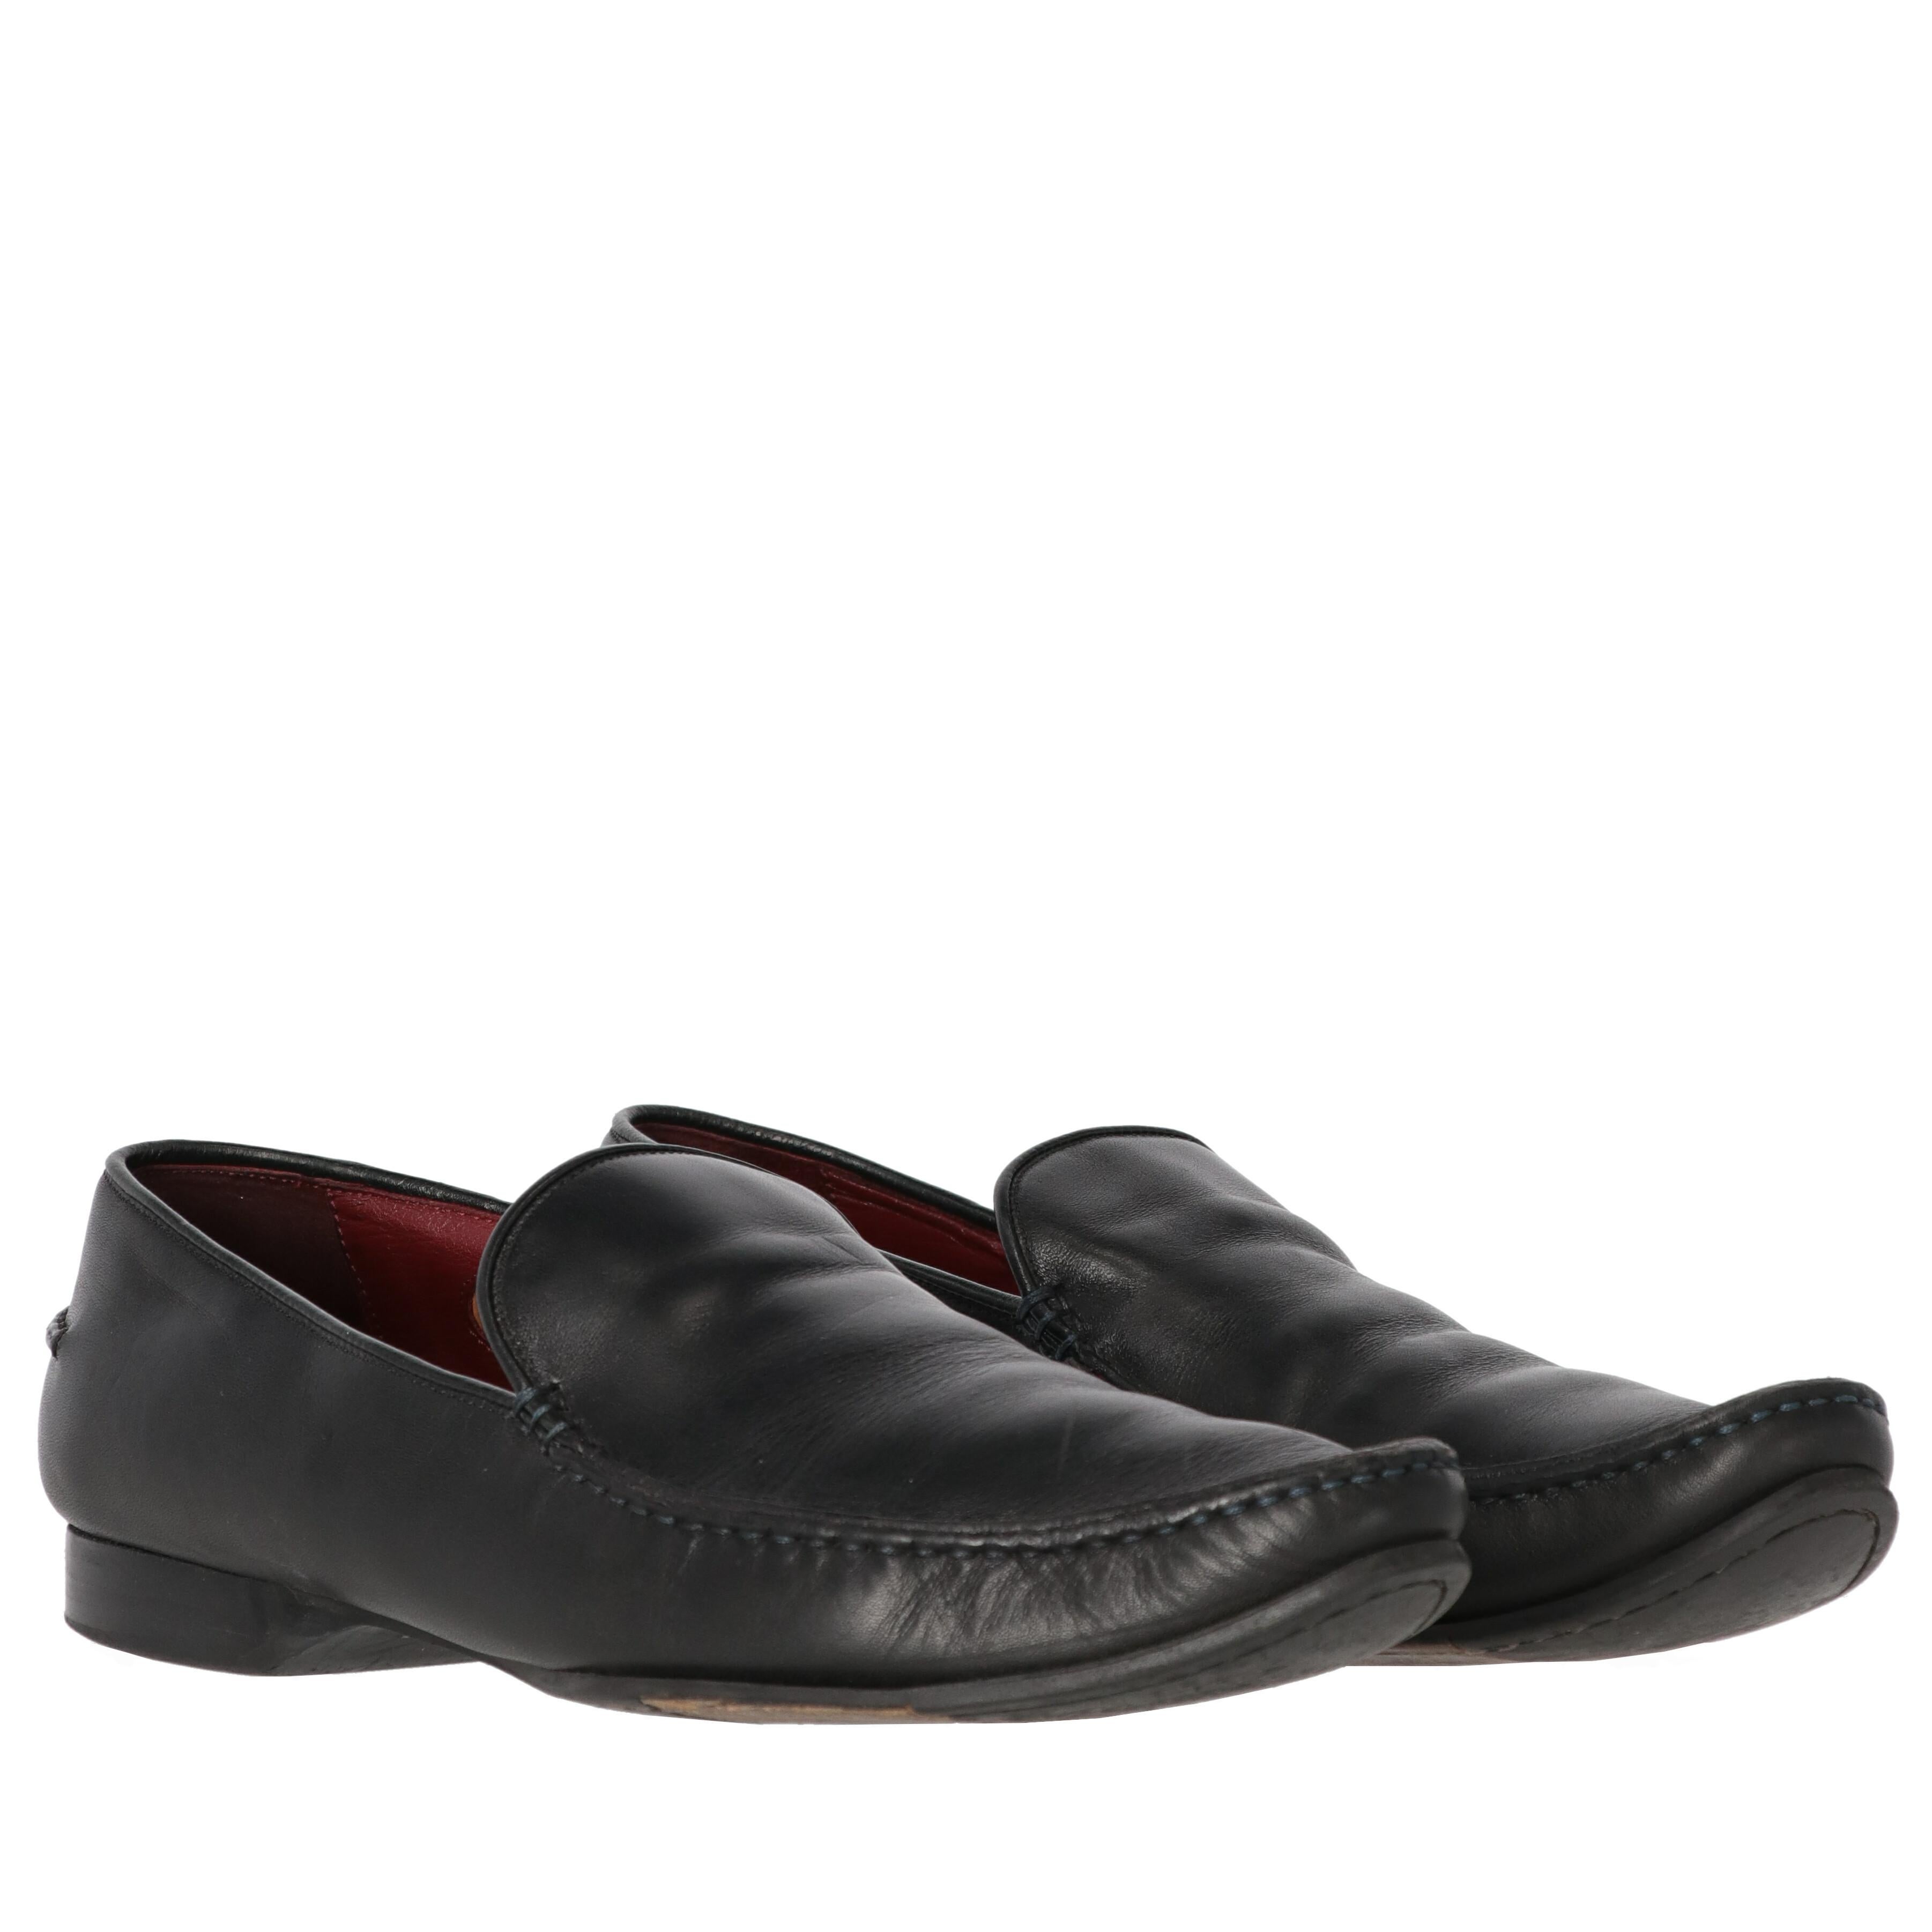 2000s Gianfranco Ferré Black Leather Loafers For Sale at 1stDibs